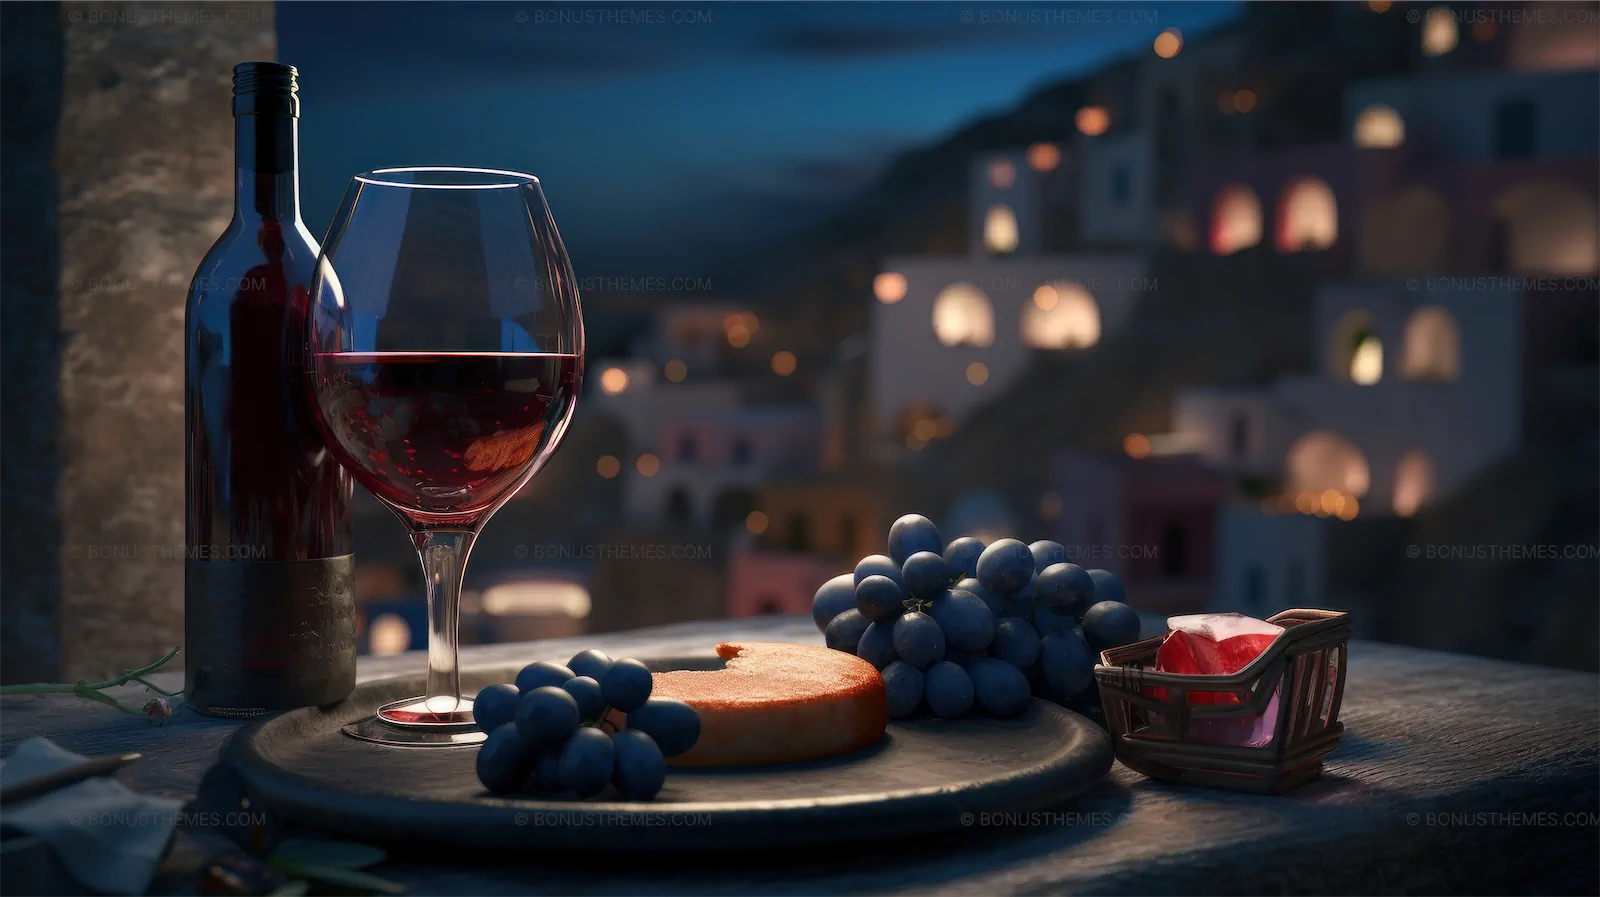 A bottle and a glass of wine with a romantic view